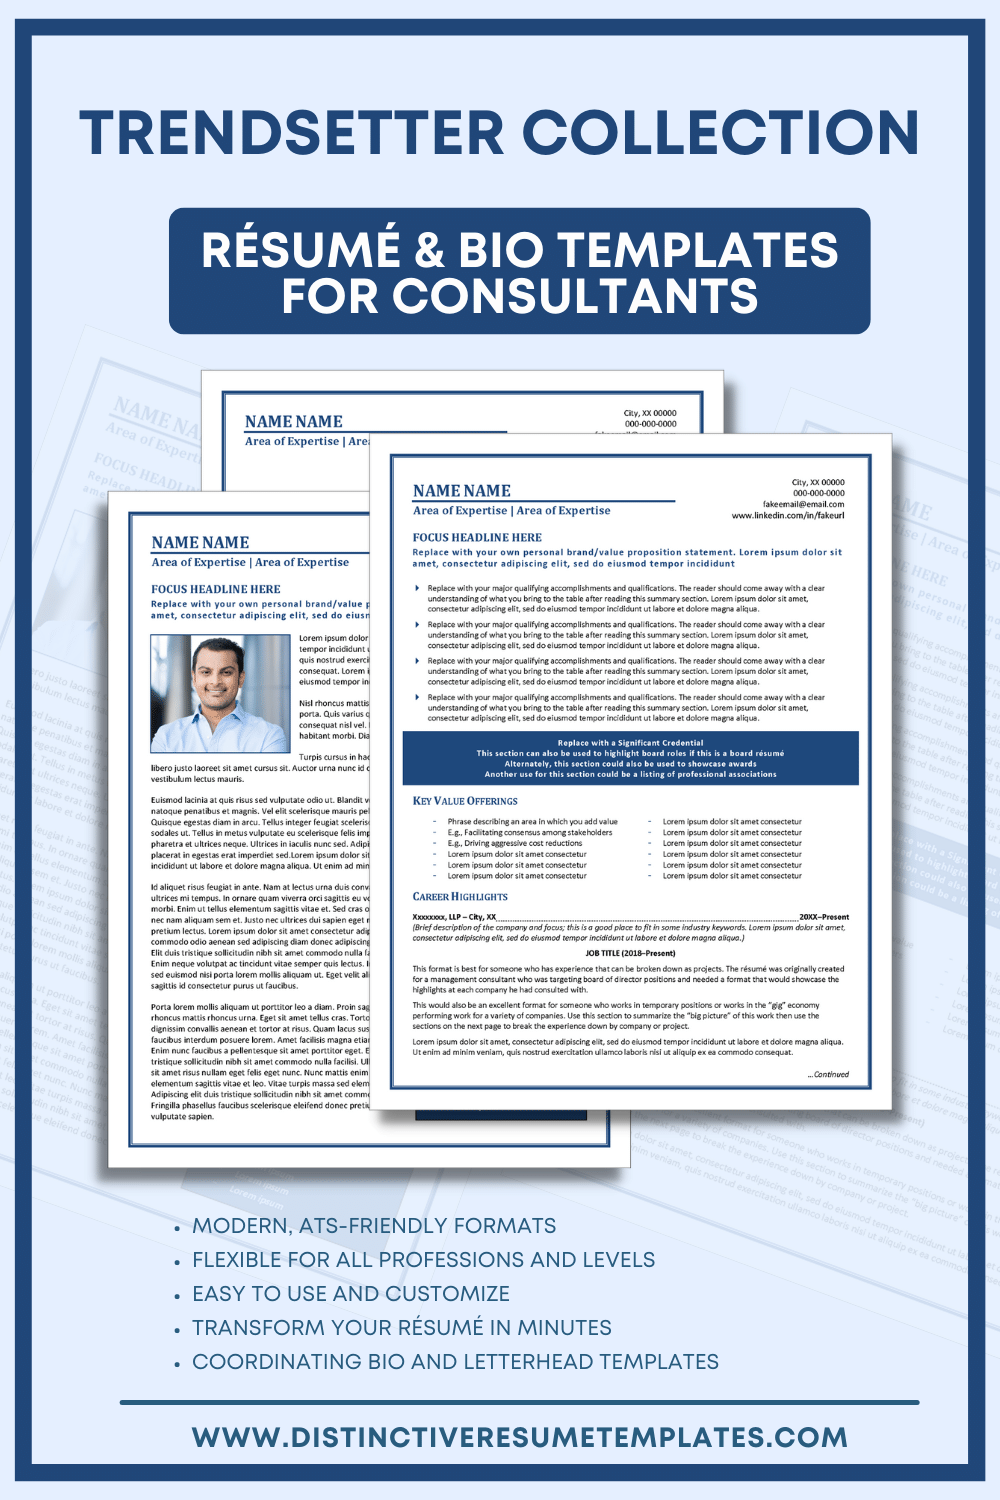 Resume and Bio Templates for Consultants and Freelancers